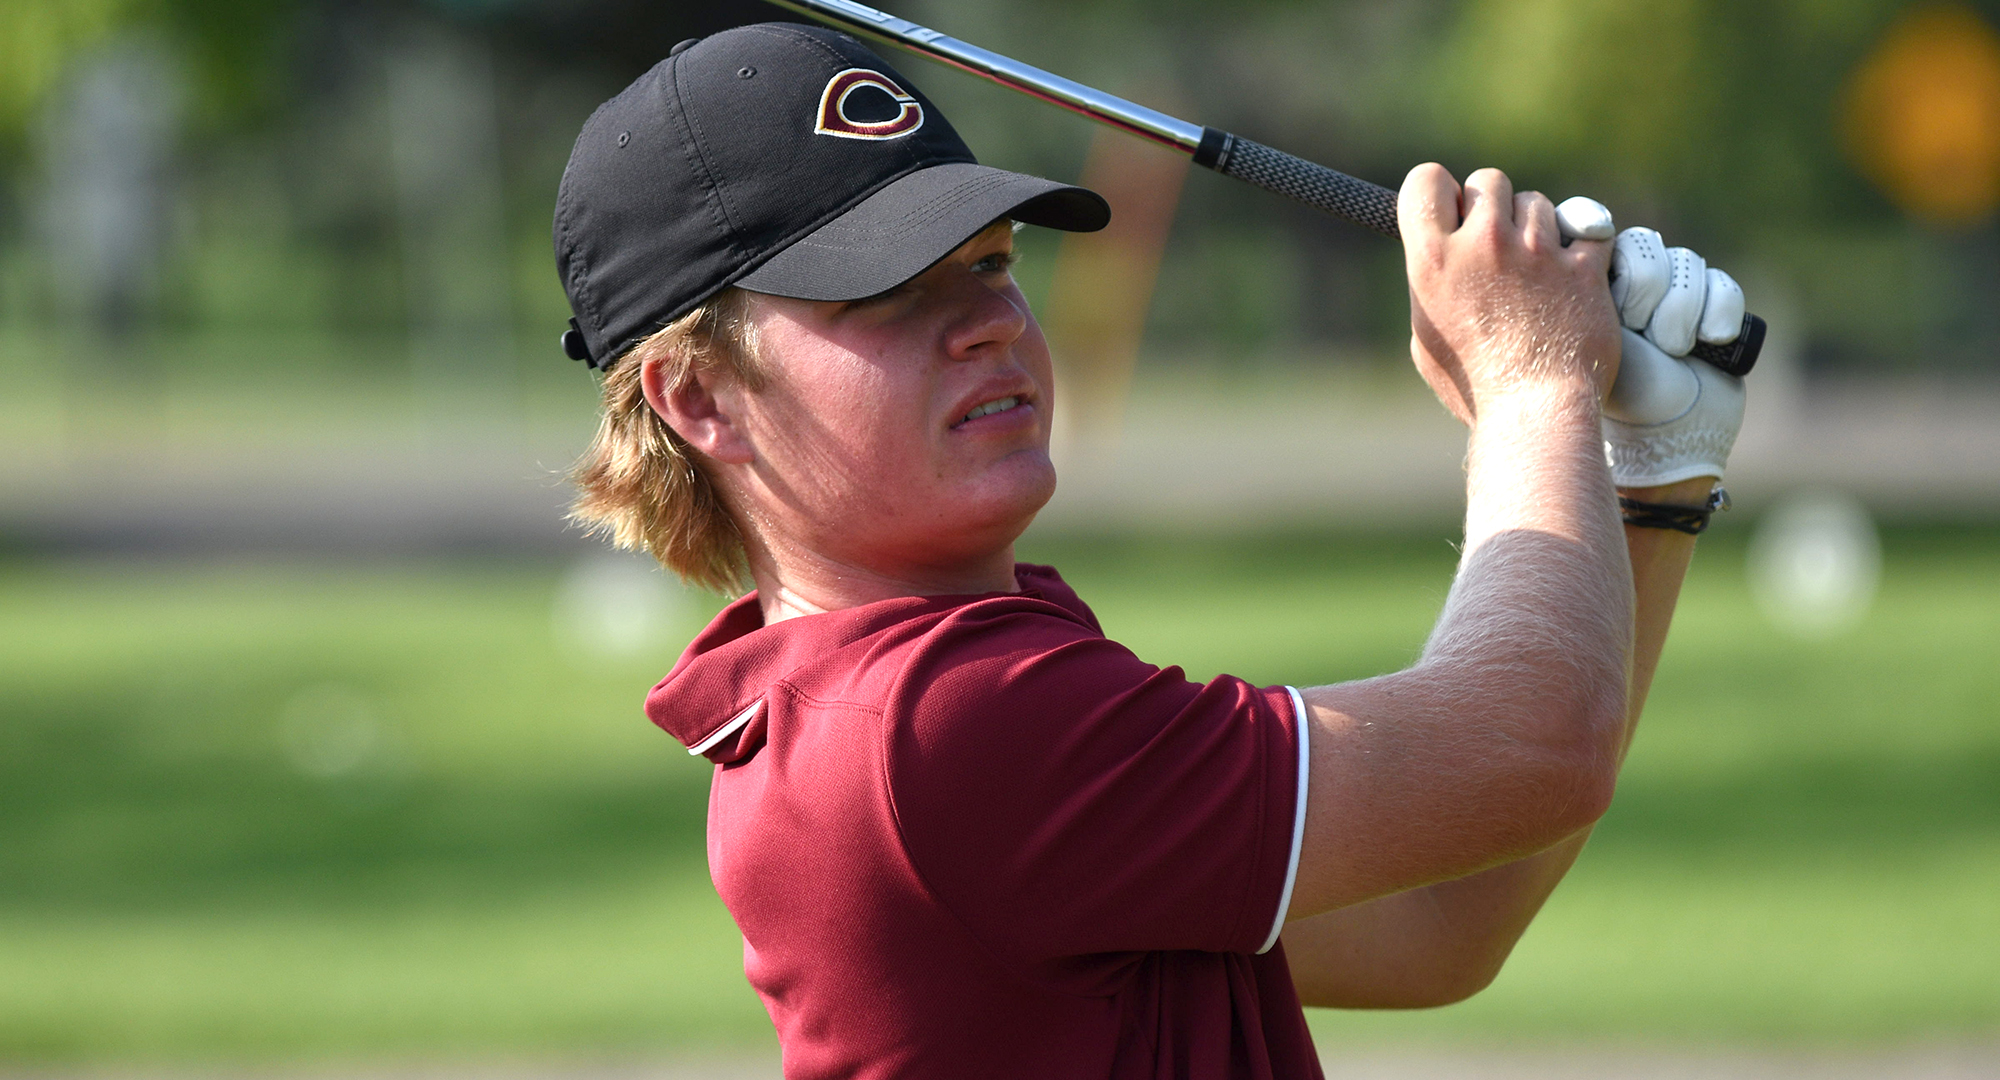 Sophomore Gabe Benson shot a 6-under 66 in the final round of the Augsburg Invite and won the individual championship by five shots.